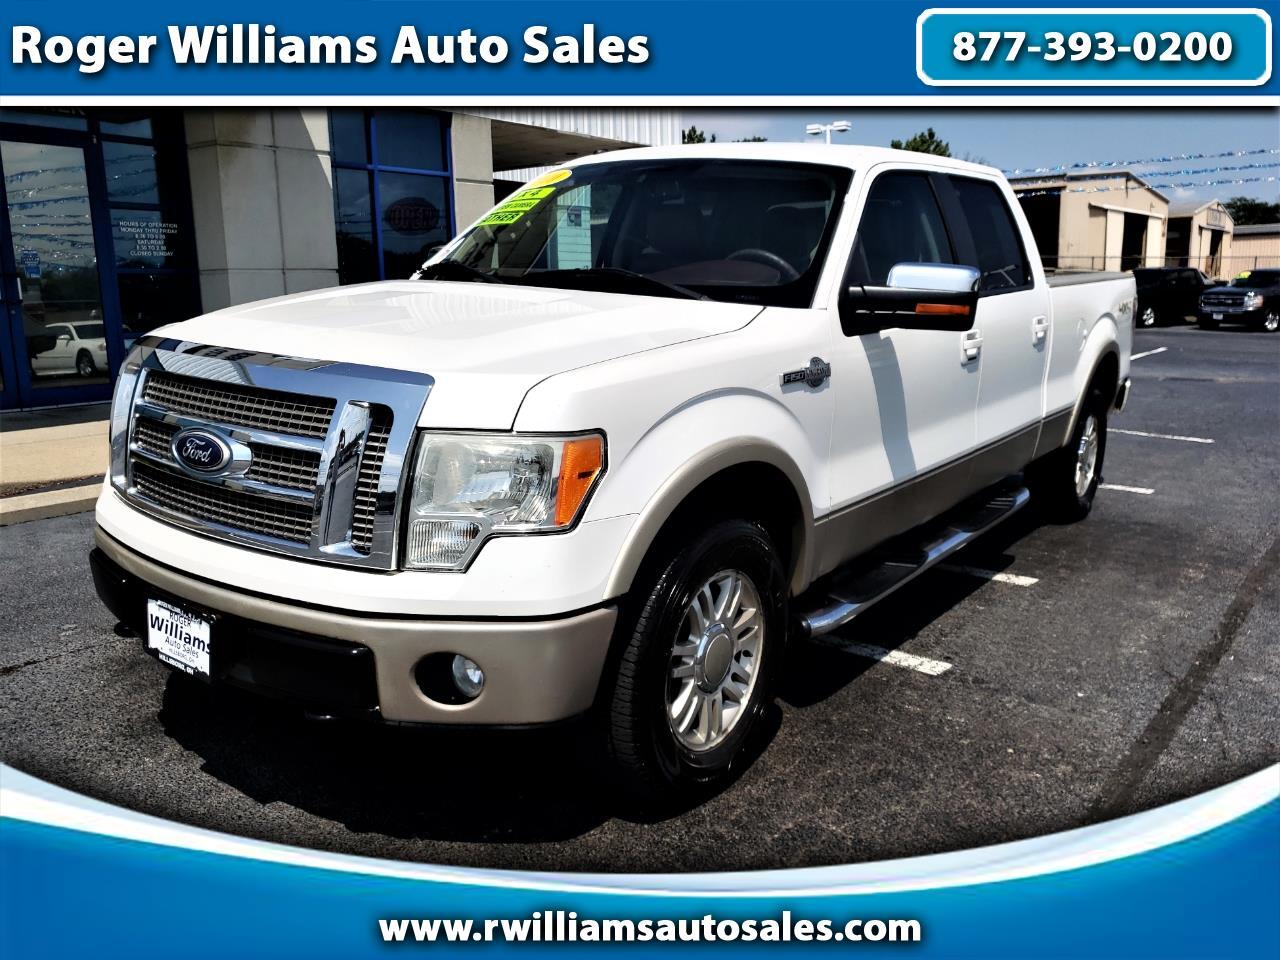 Used 2010 Ford F 150 4wd Supercrew 145 King Ranch For Sale